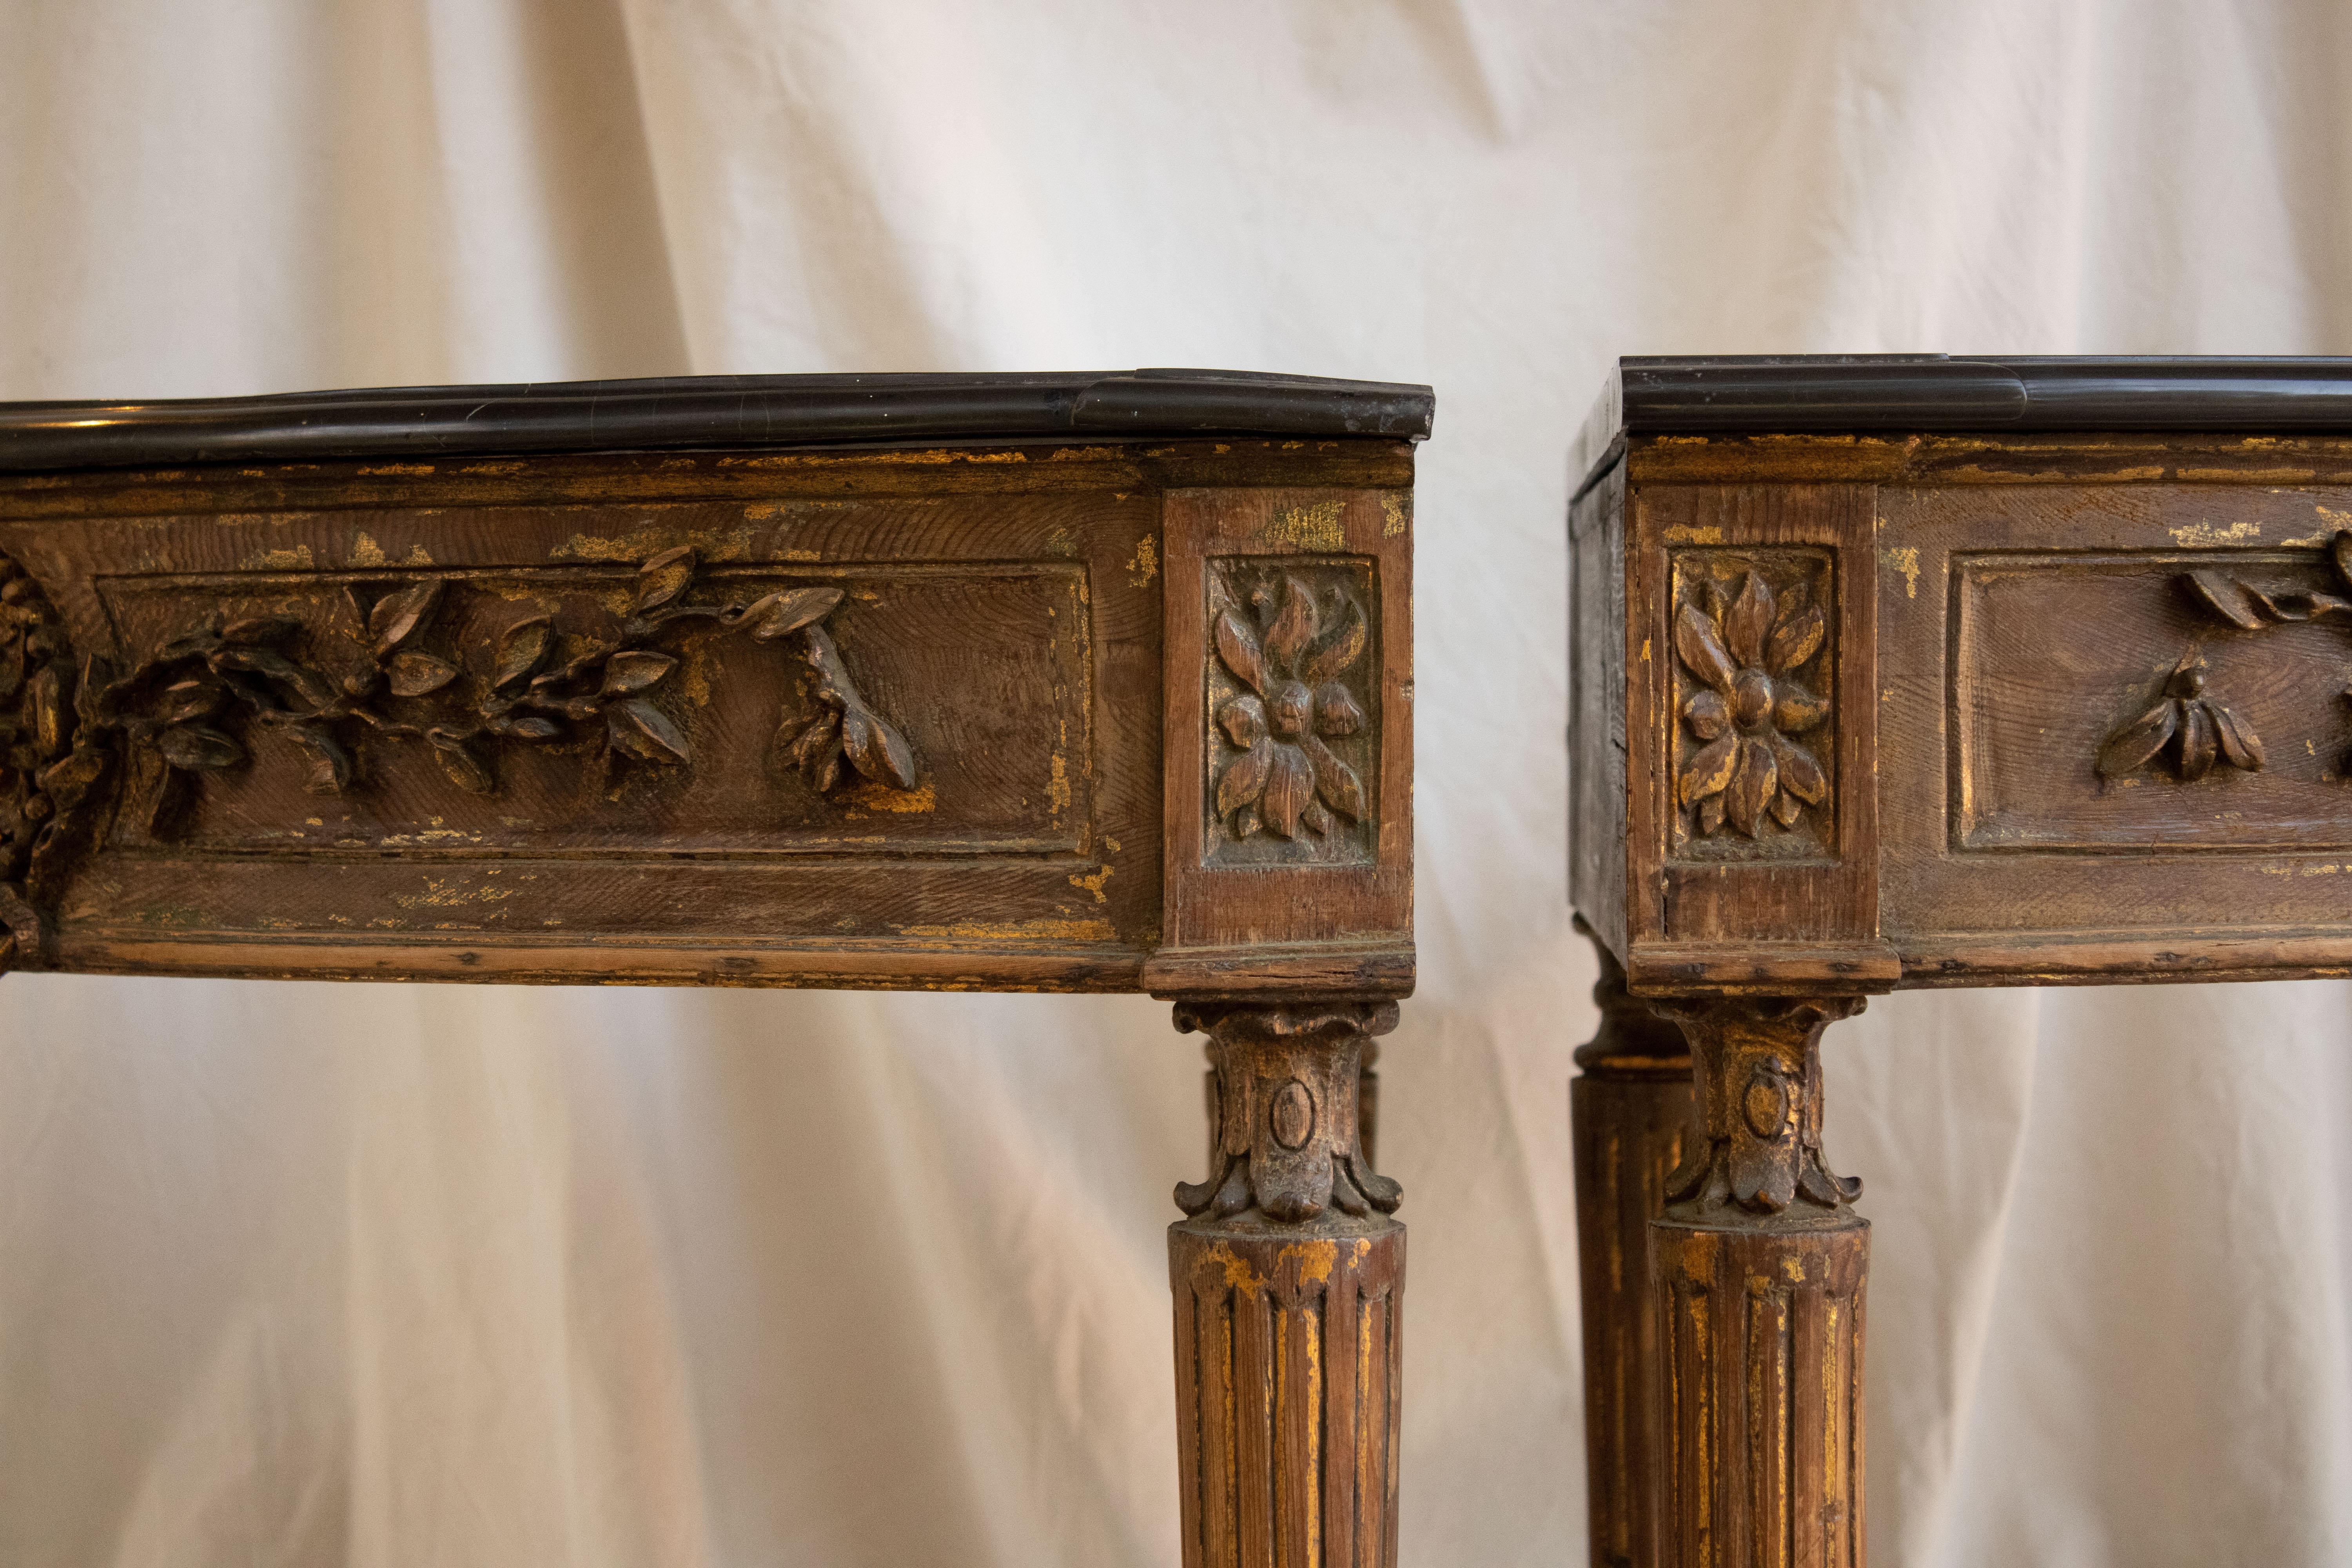 Pair of Louis XVI style corner tables.
Carved wood, with traces of ancient gold and black marble tops. 
Portugal 19th century.